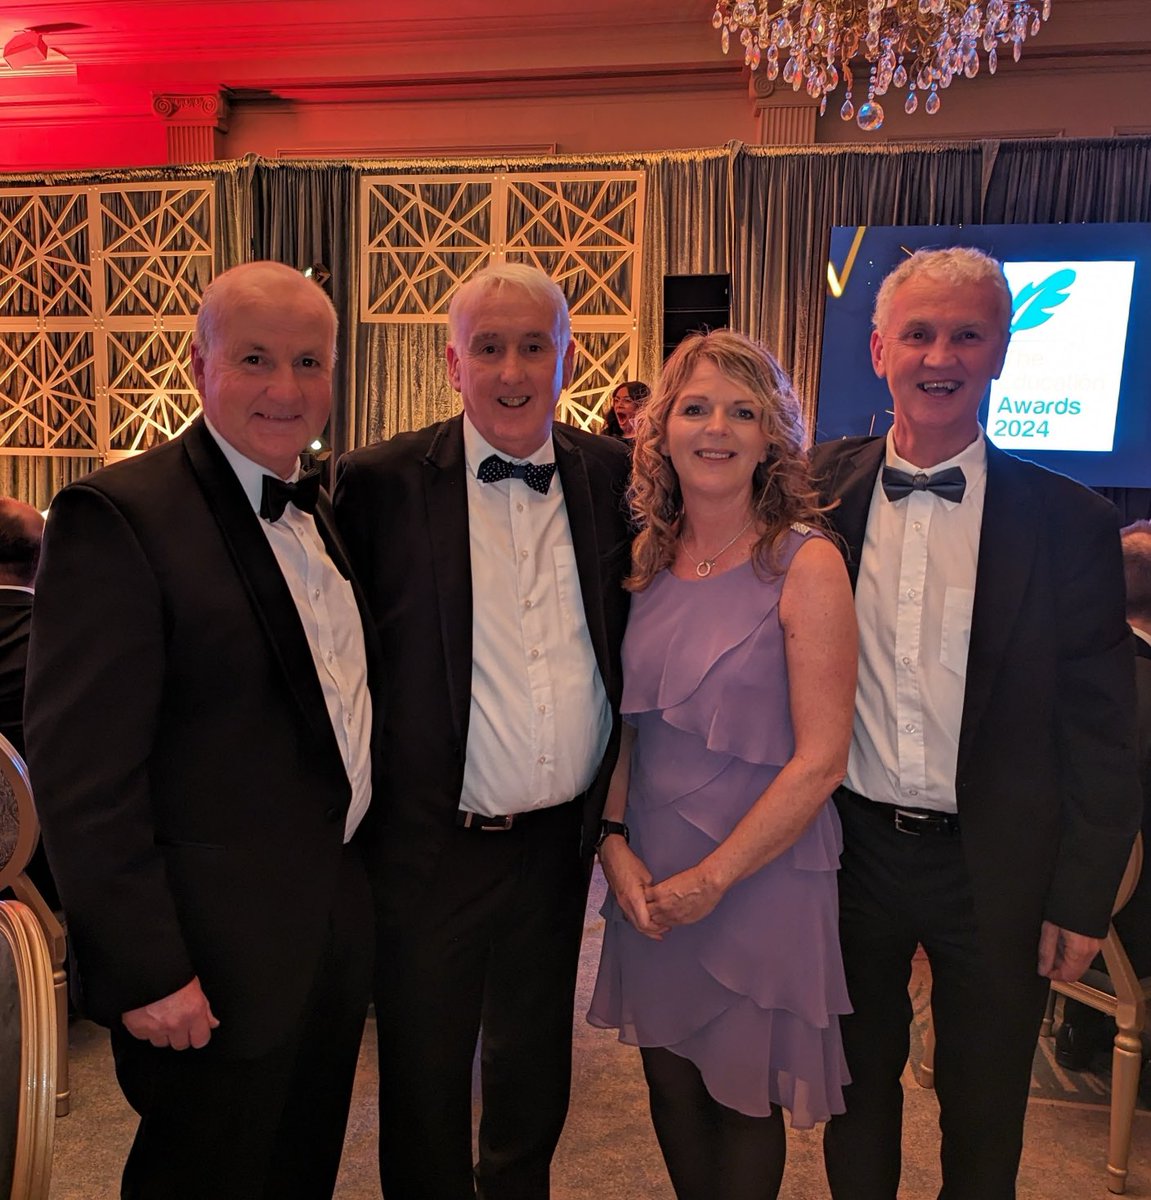 Congratulations to the team from the @rubiconcentre⁩ who supported the ⁦@MTU_ie⁩ Innovation Challenge Programme which won the Best International Collaboration Project at the Education Awards 2024. #SucceedingTogether